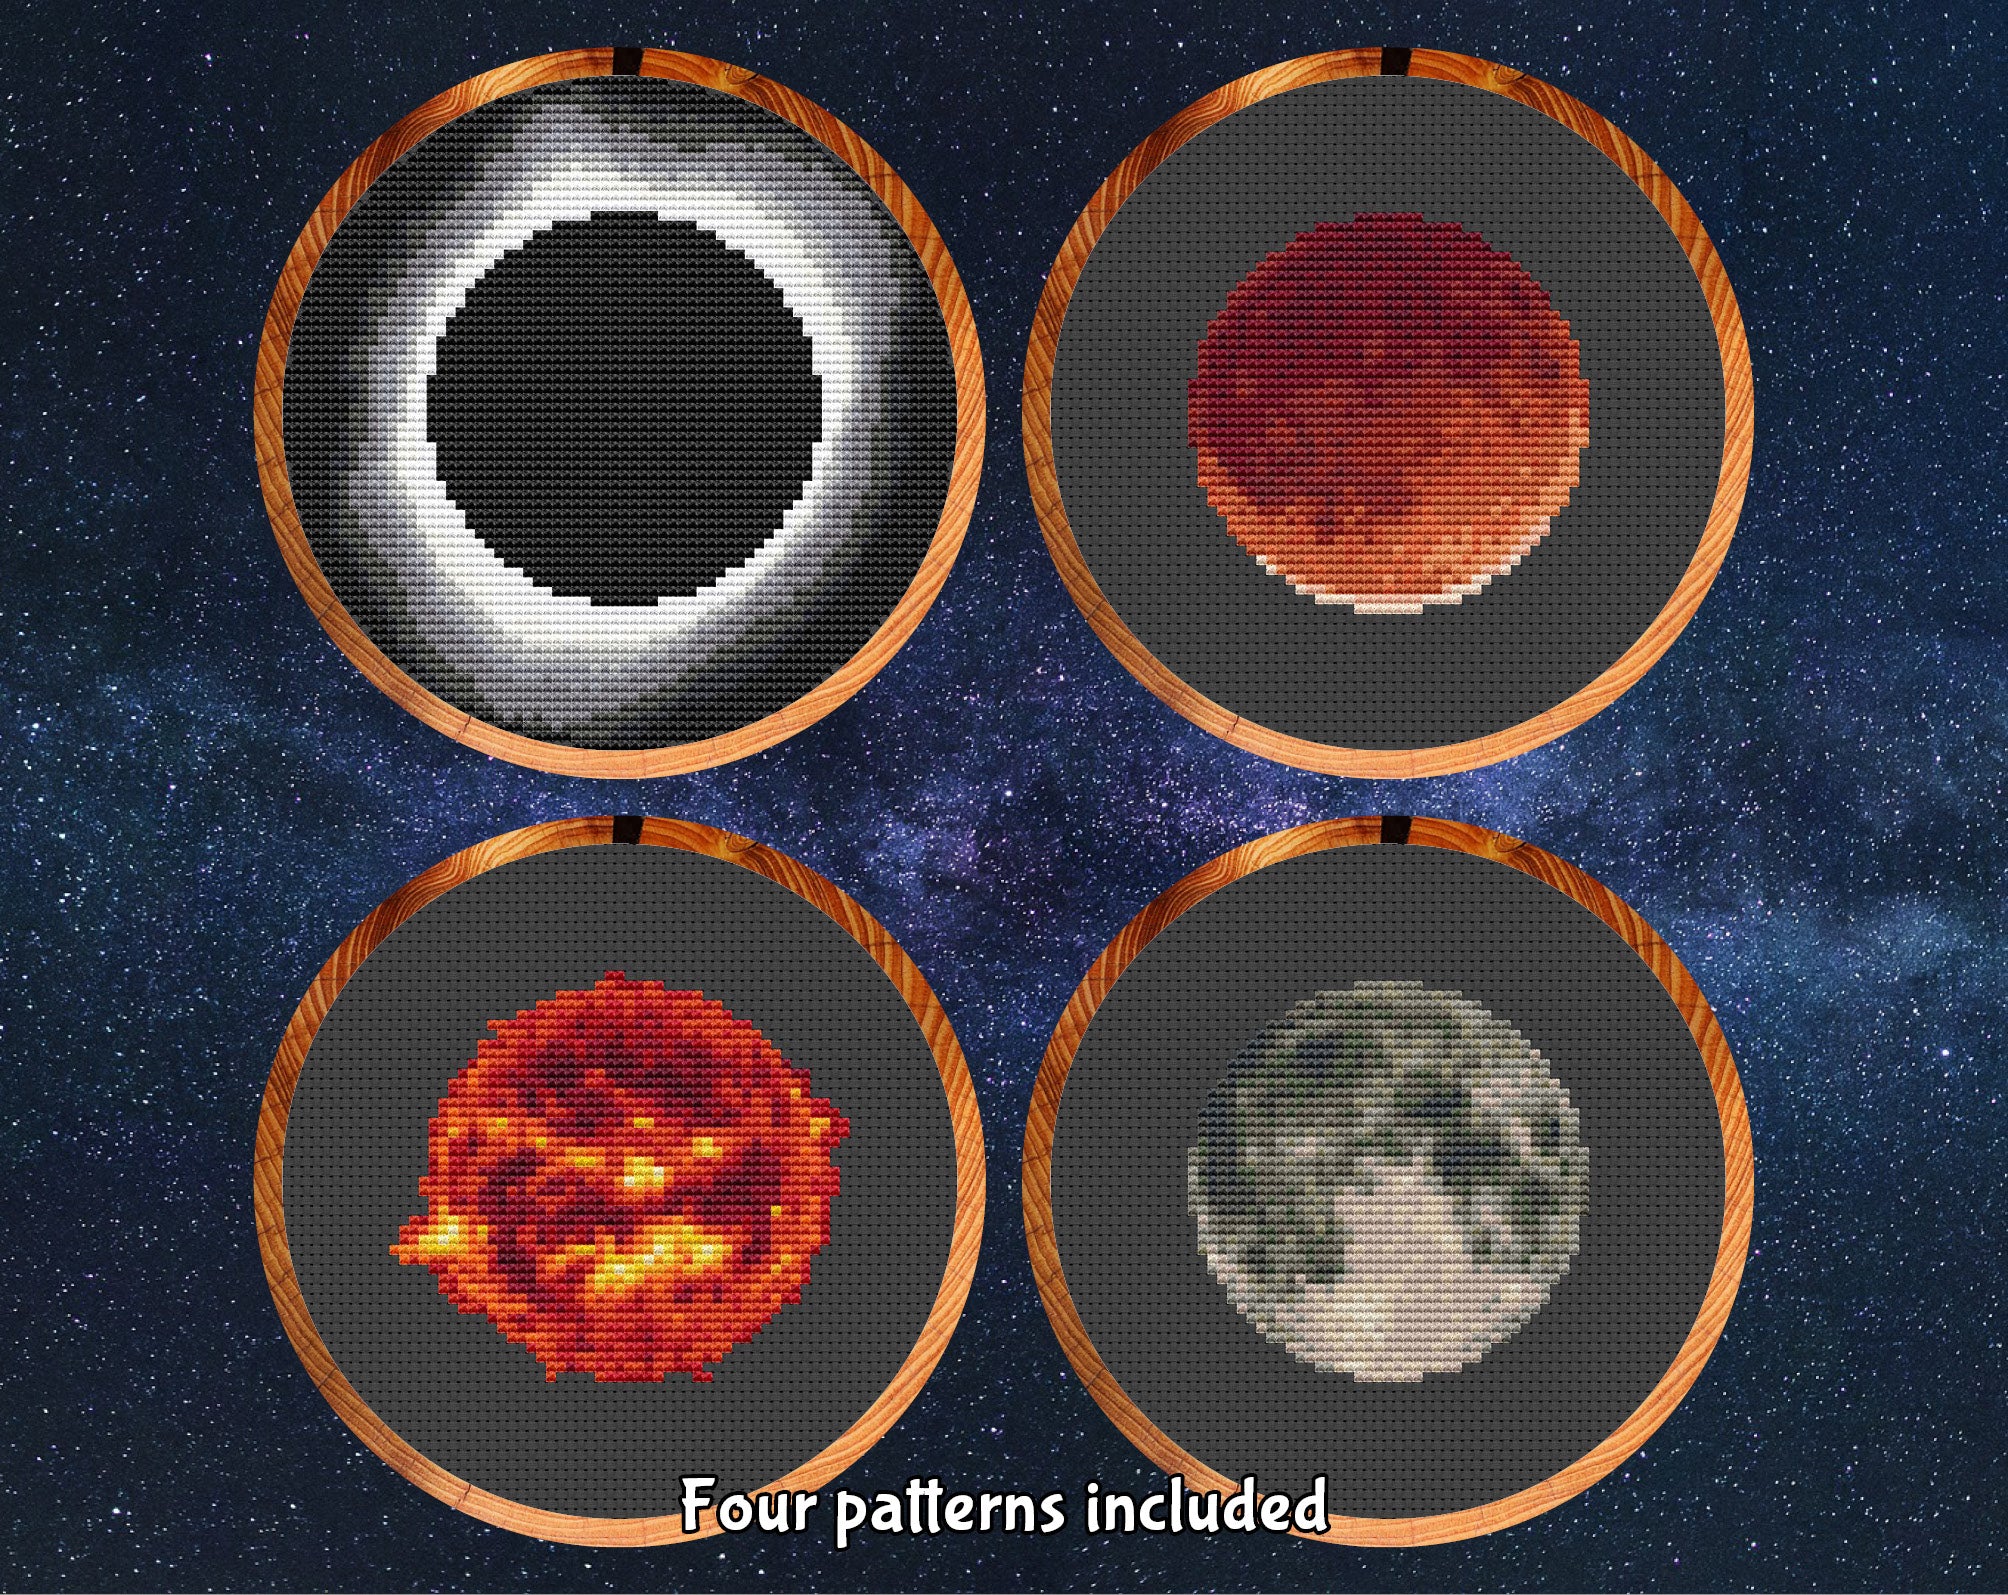 Cross stitch patterns of Solar Eclipse, Lunar Eclipse, Sun and Moon. Four patterns included in bundle.